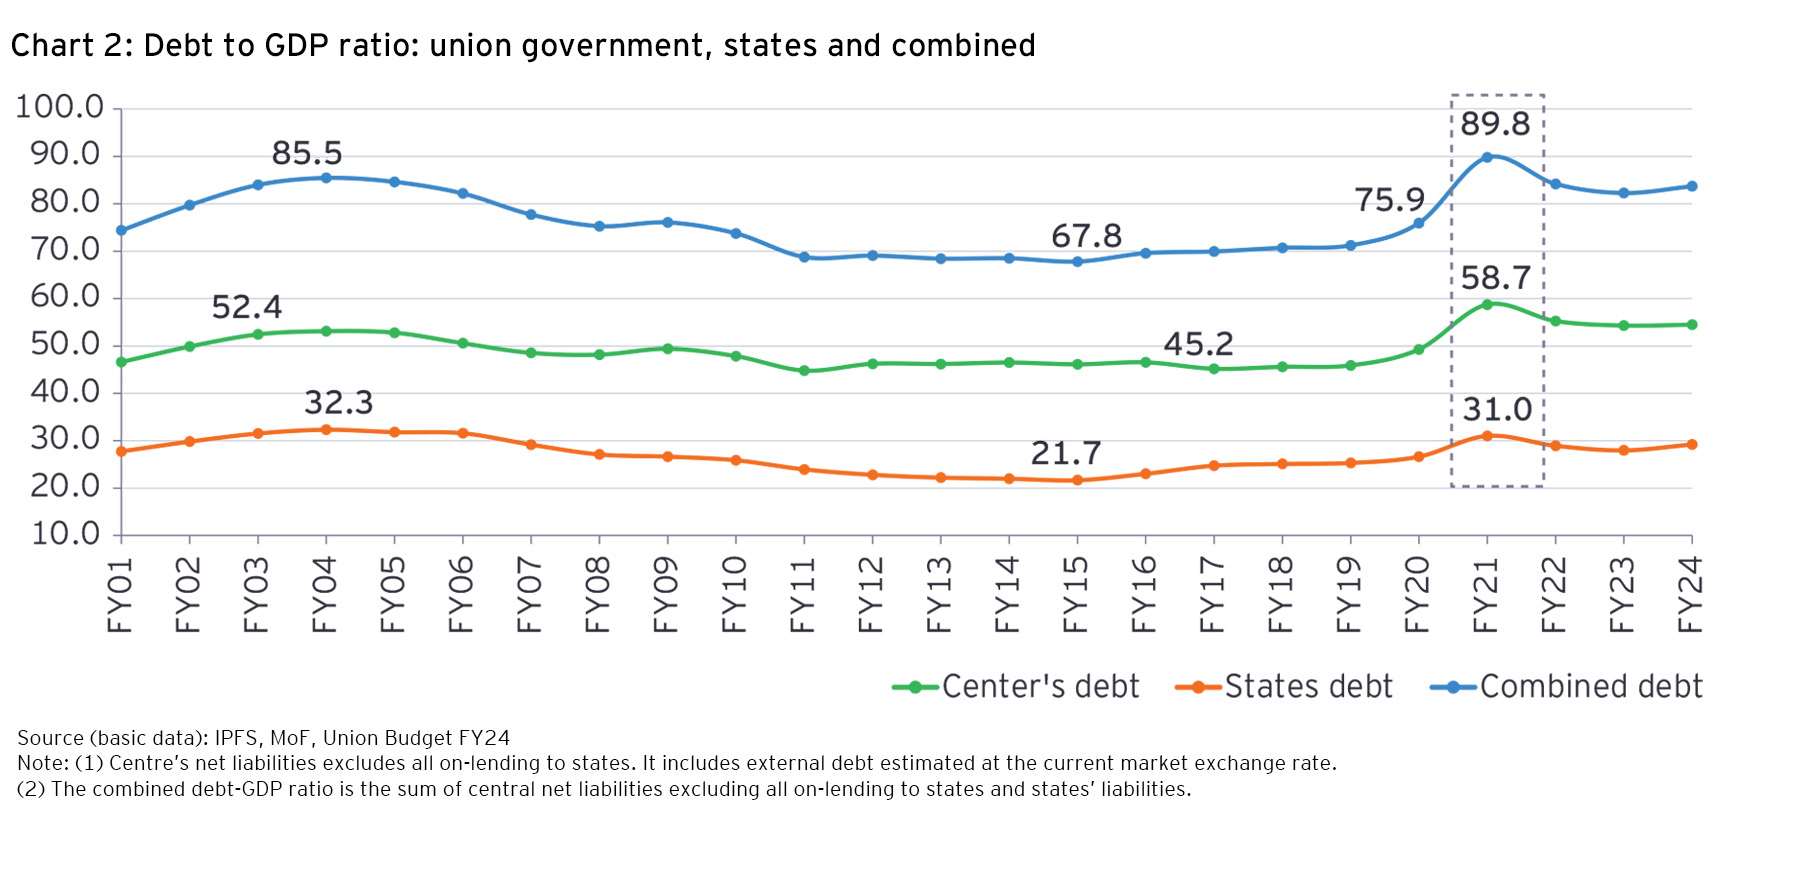 Debt to GDP ratio: union government, states and combined